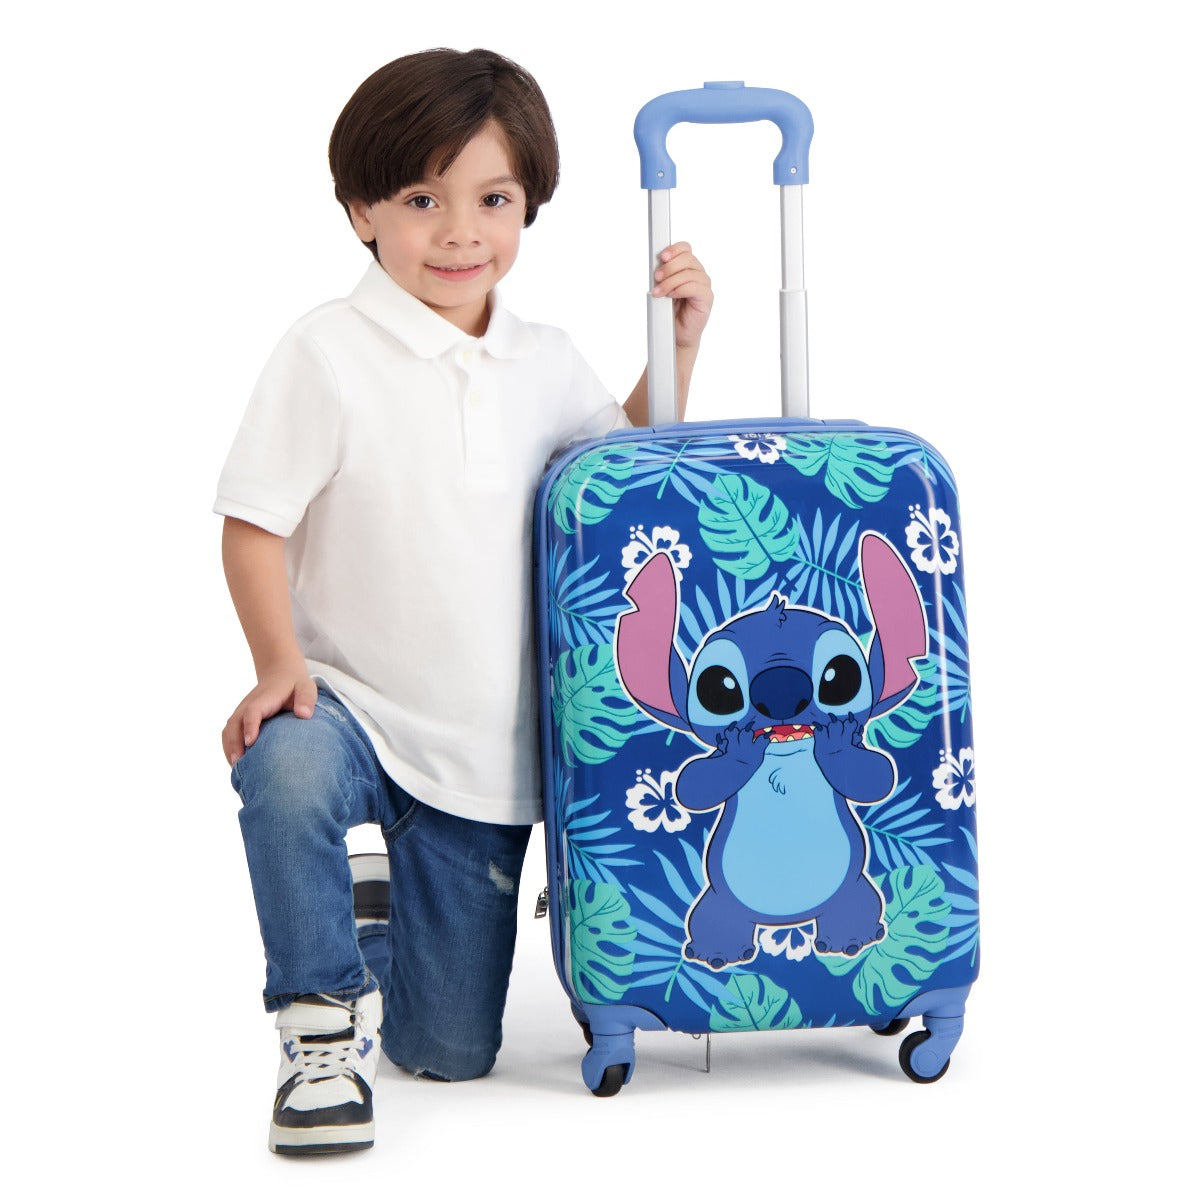 Blue Disney Ful Stitch tropical leaves 21" suitcase - best kids luggage for travel